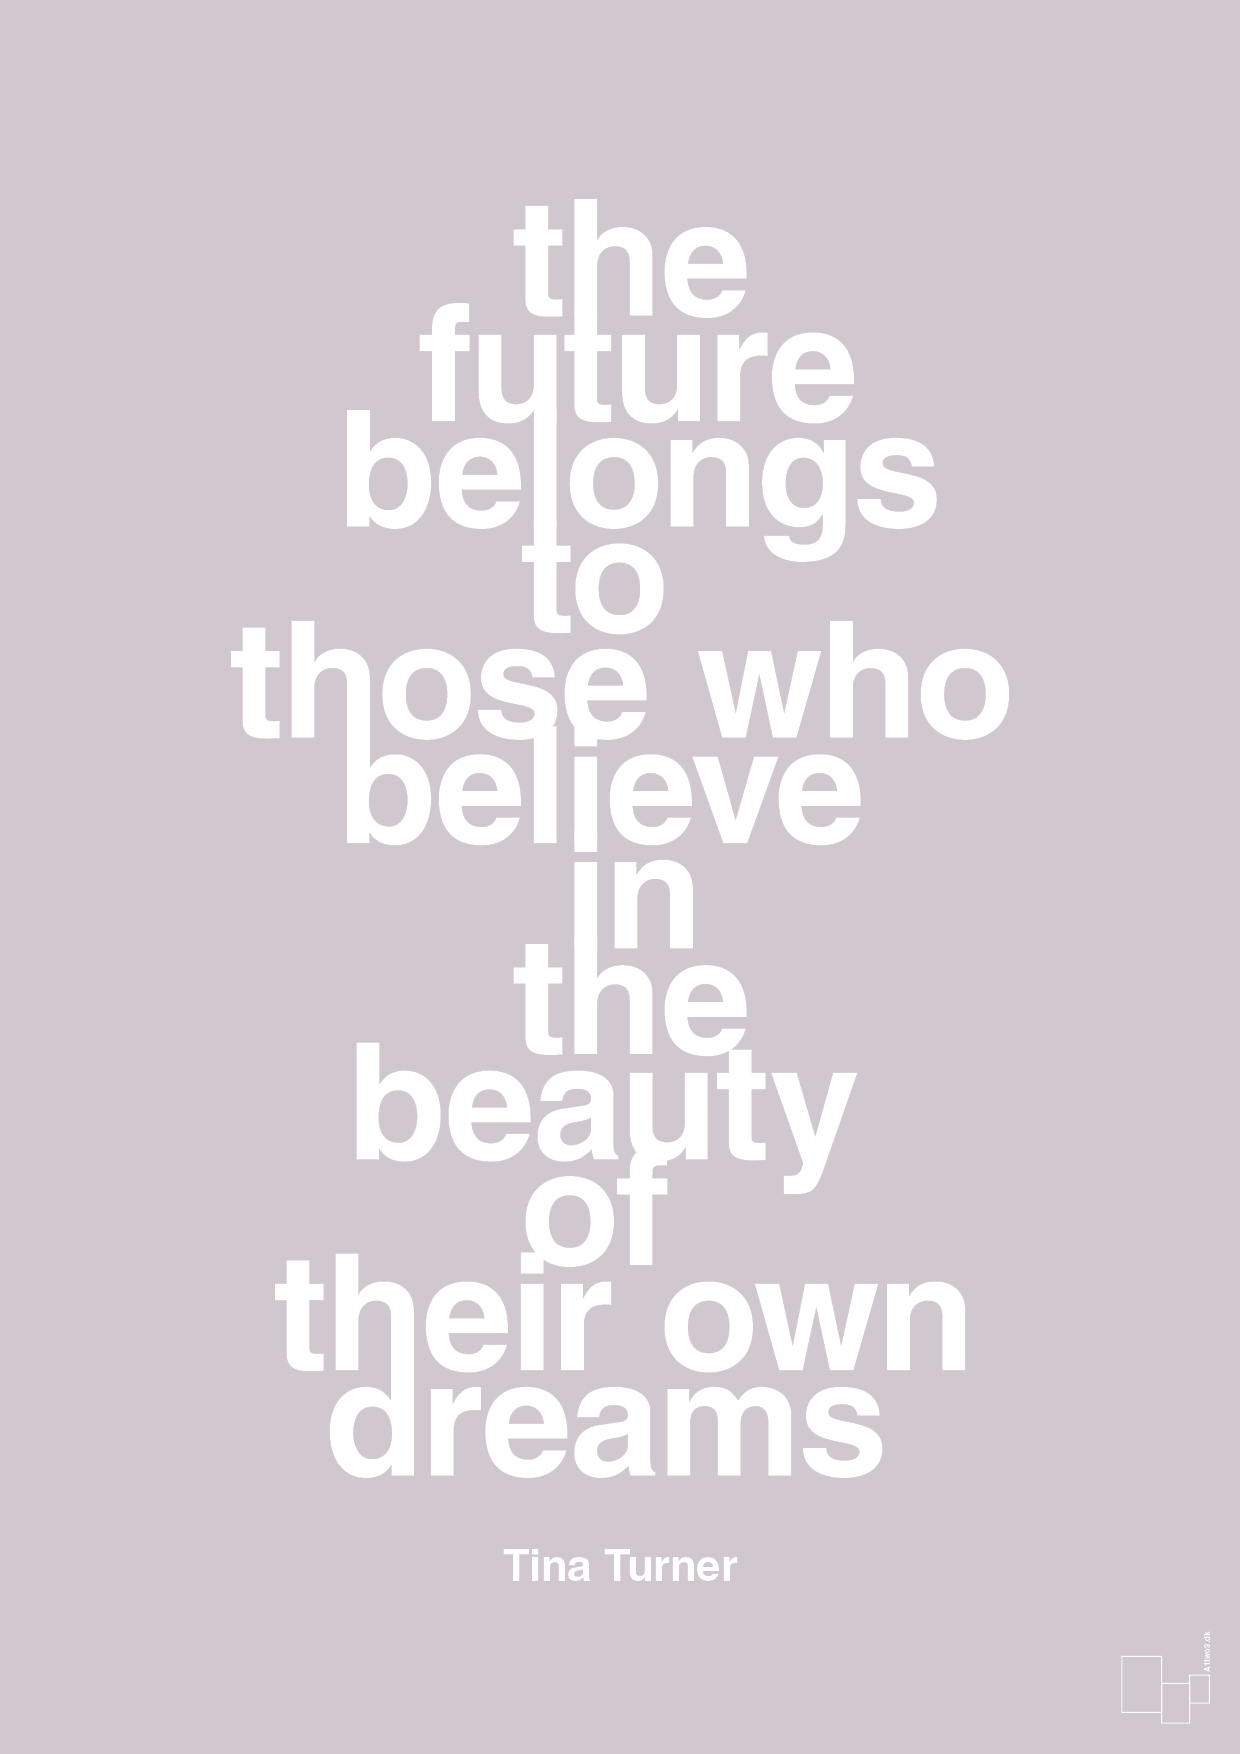 the future belongs to those who believe in the beauty of their own dreams - Plakat med Citater i Dusty Lilac